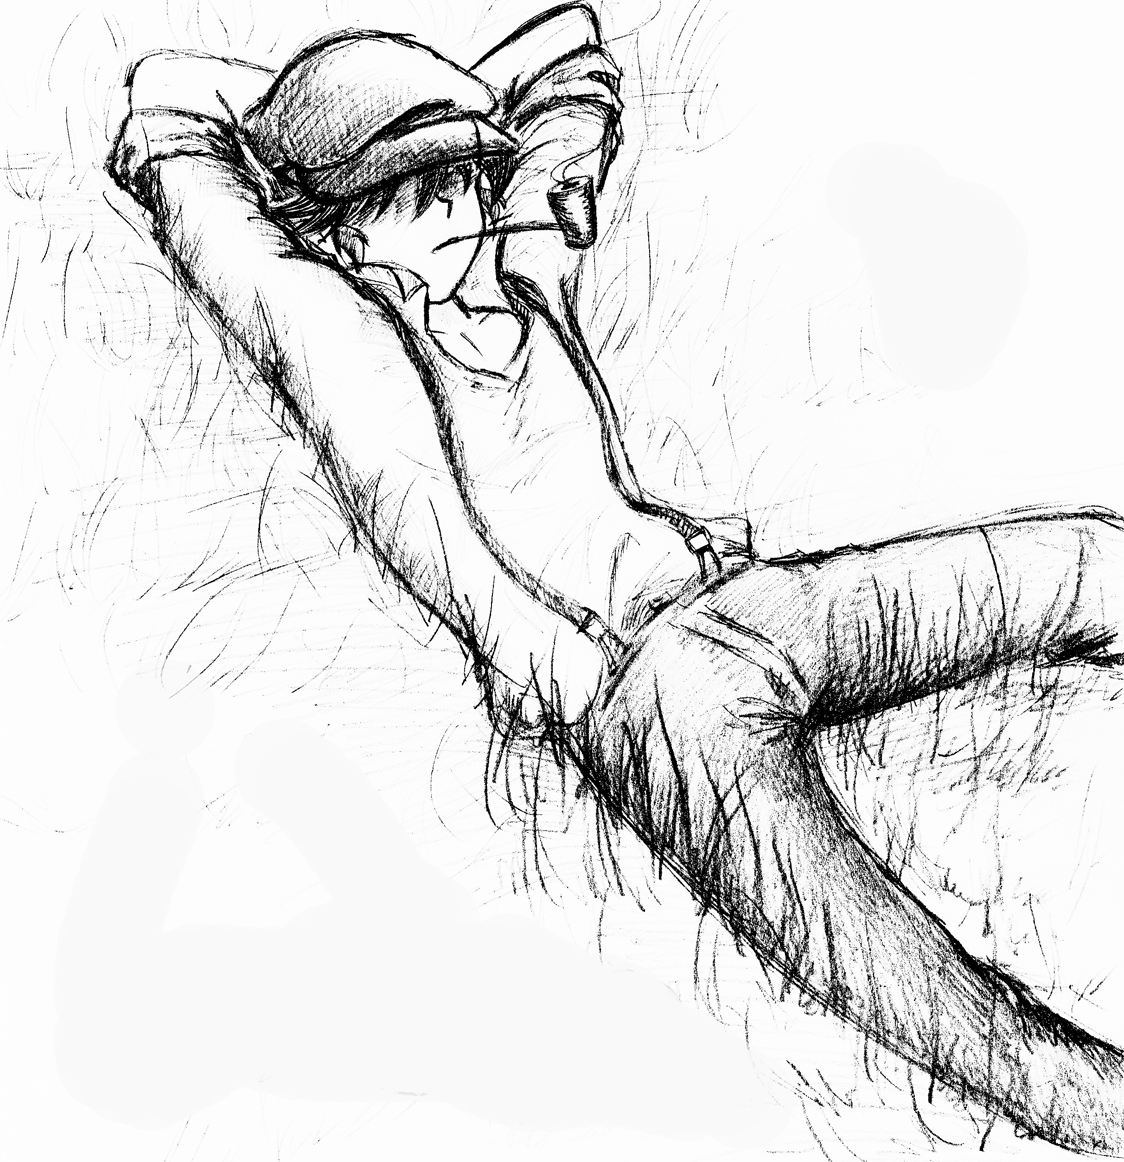 Huckleberry Finn laying in the grass smoking a pipe pencil sketch